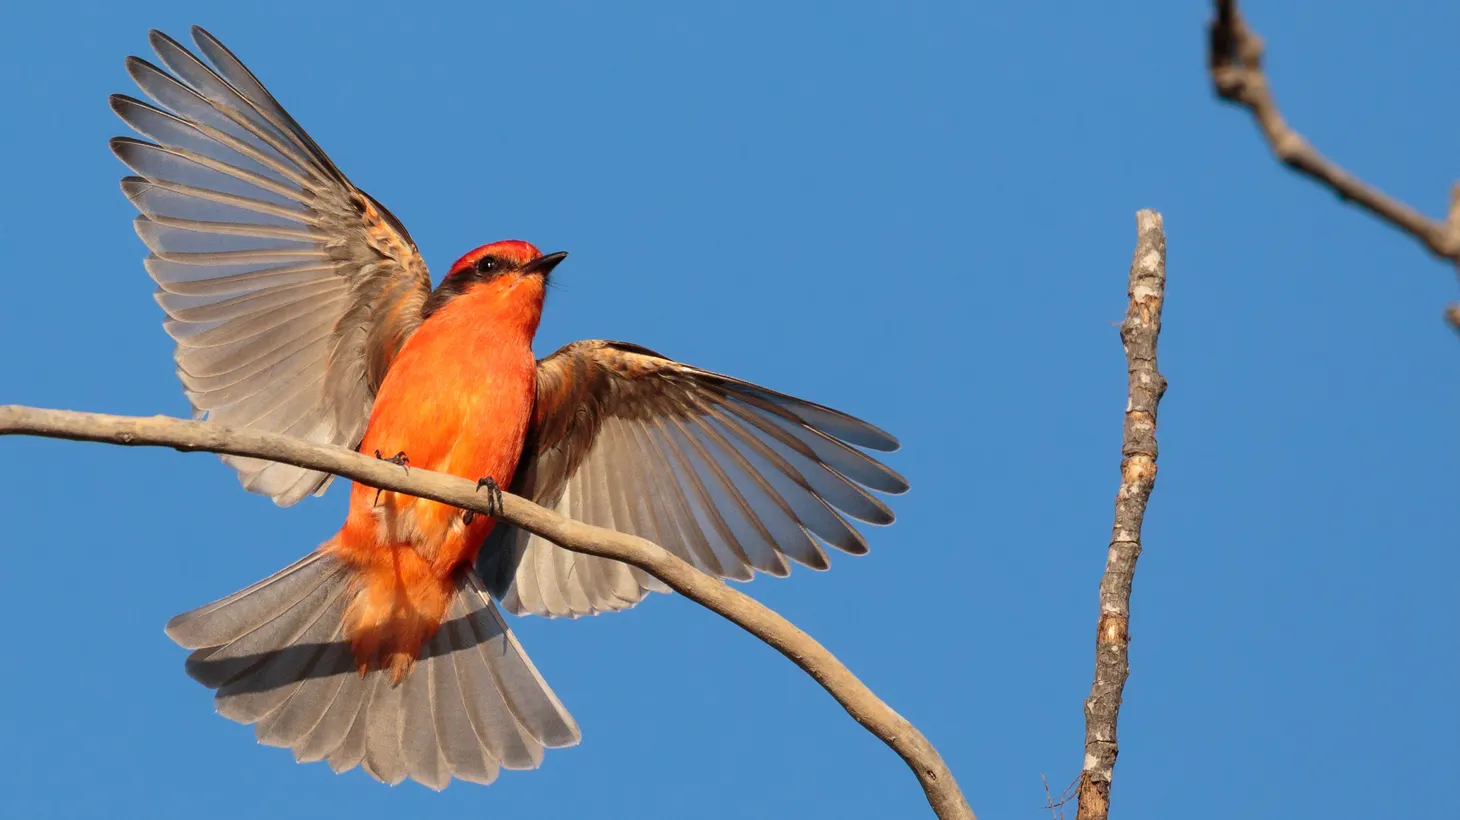 The Vermilion Flycatcher is a tropical bird species that’s moved into Southern California in recent years. They are usually common in LA during the summer, but volunteers with the San Fernando Valley Christmas Bird Count spotted them during the winter.